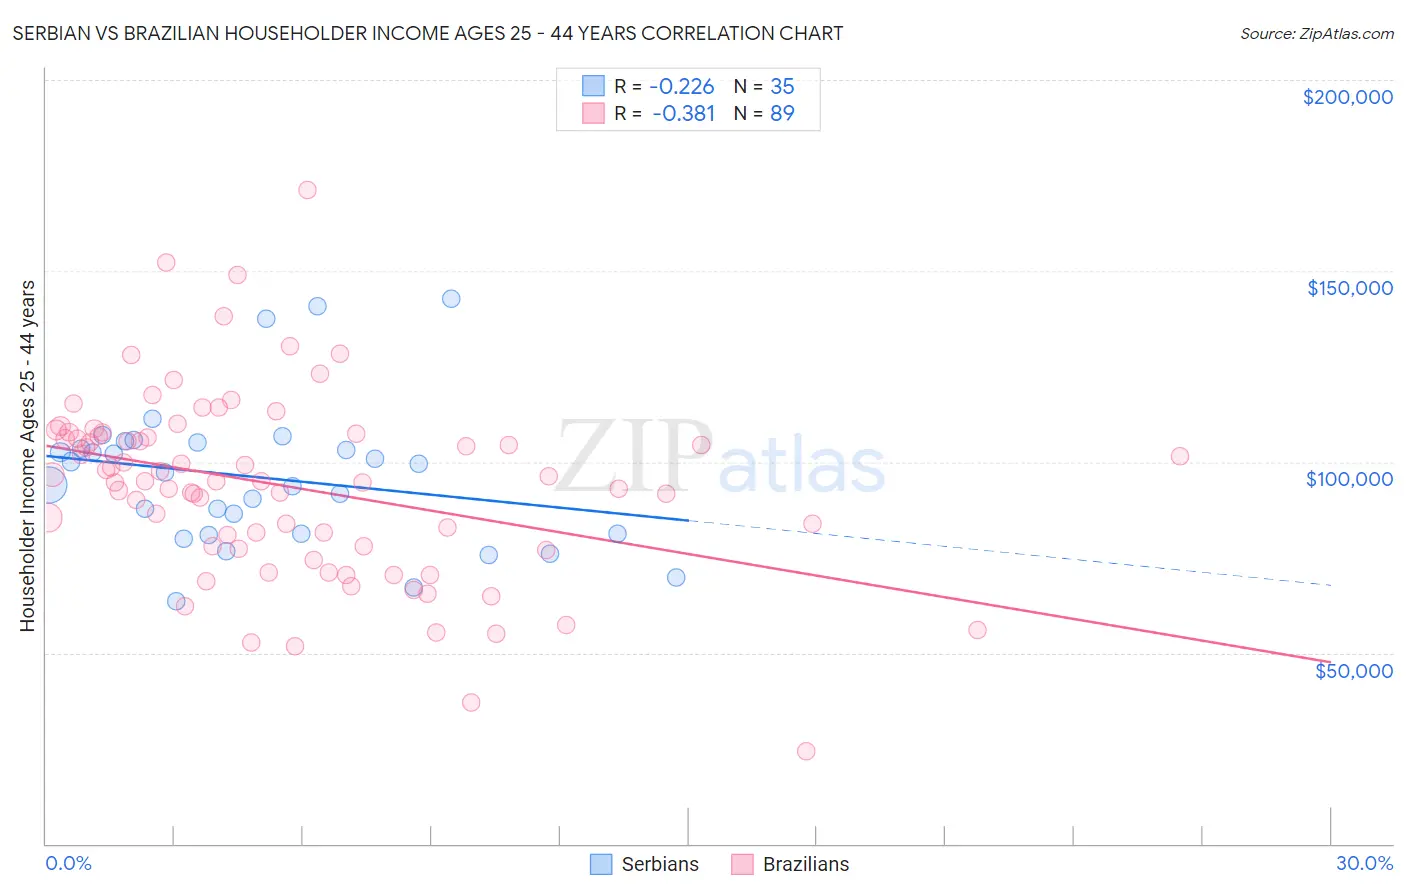 Serbian vs Brazilian Householder Income Ages 25 - 44 years